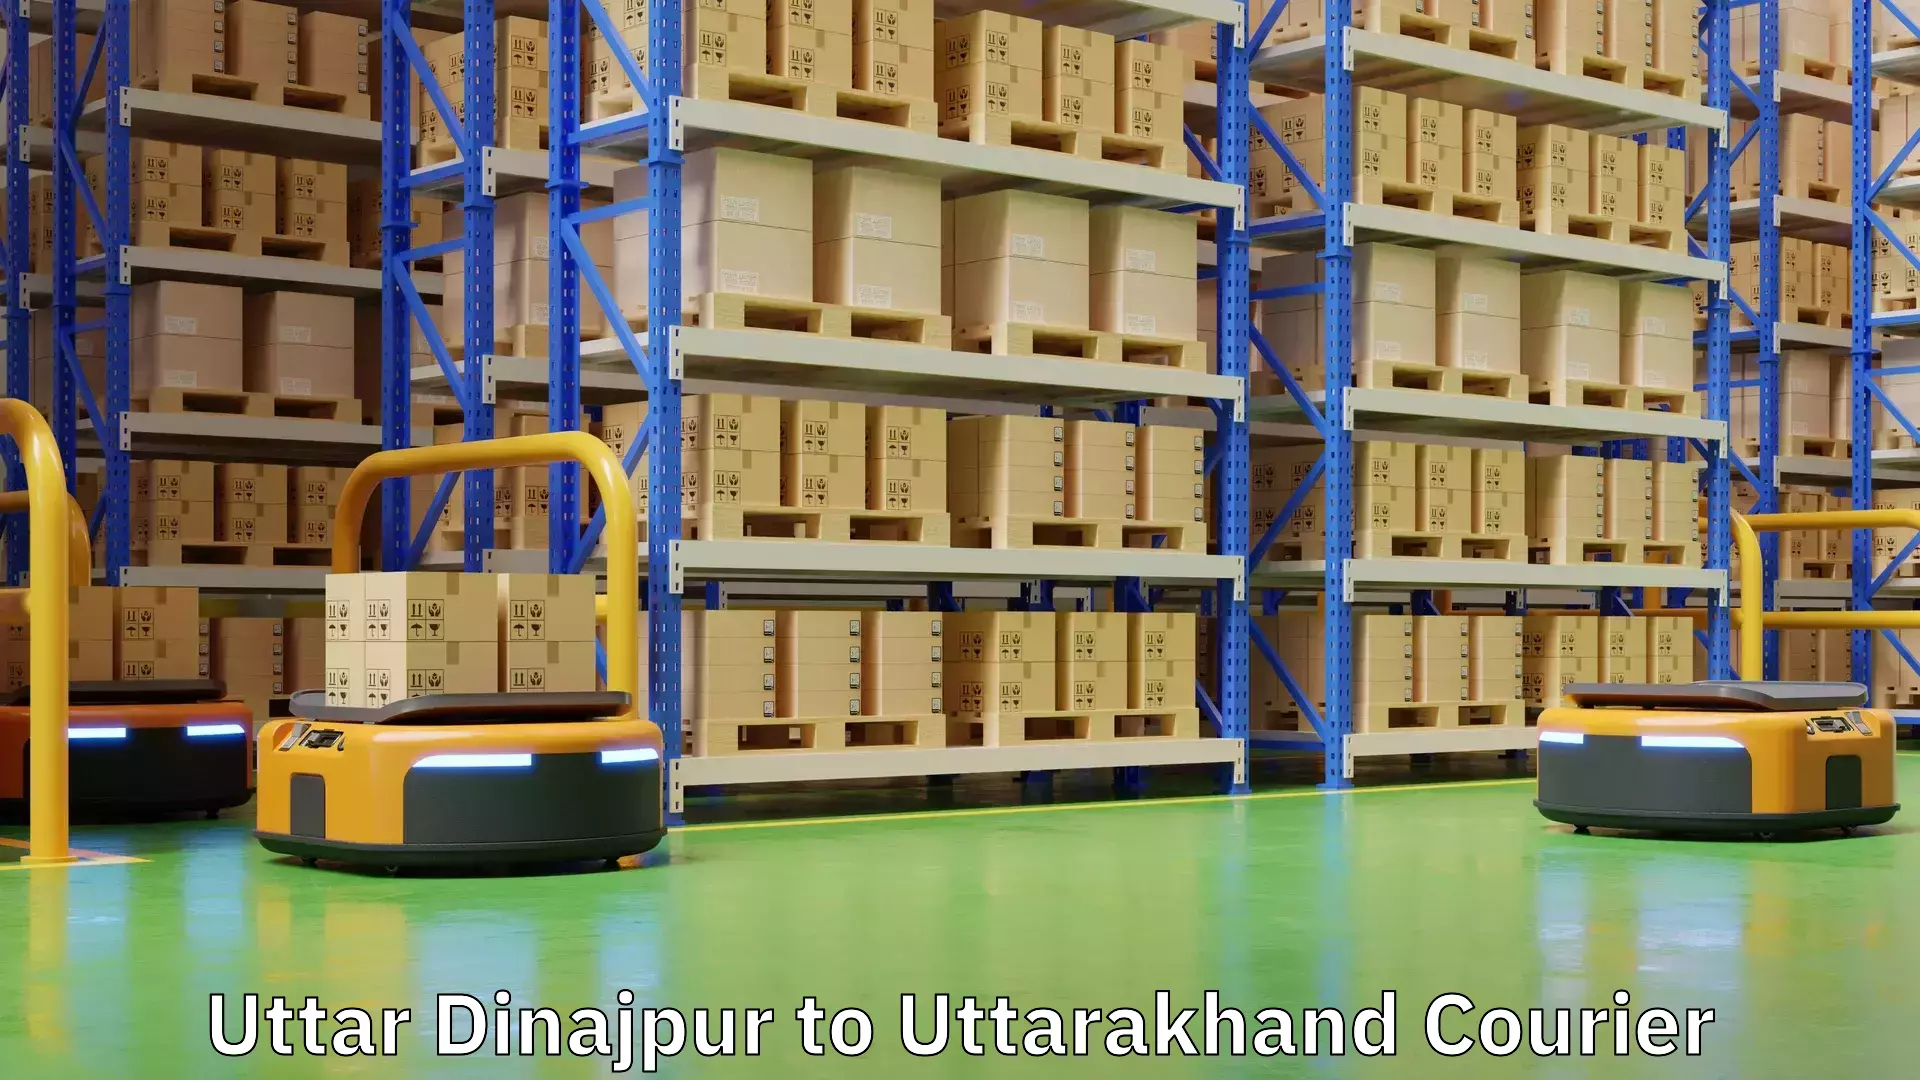 Advanced delivery solutions in Uttar Dinajpur to Uttarakhand